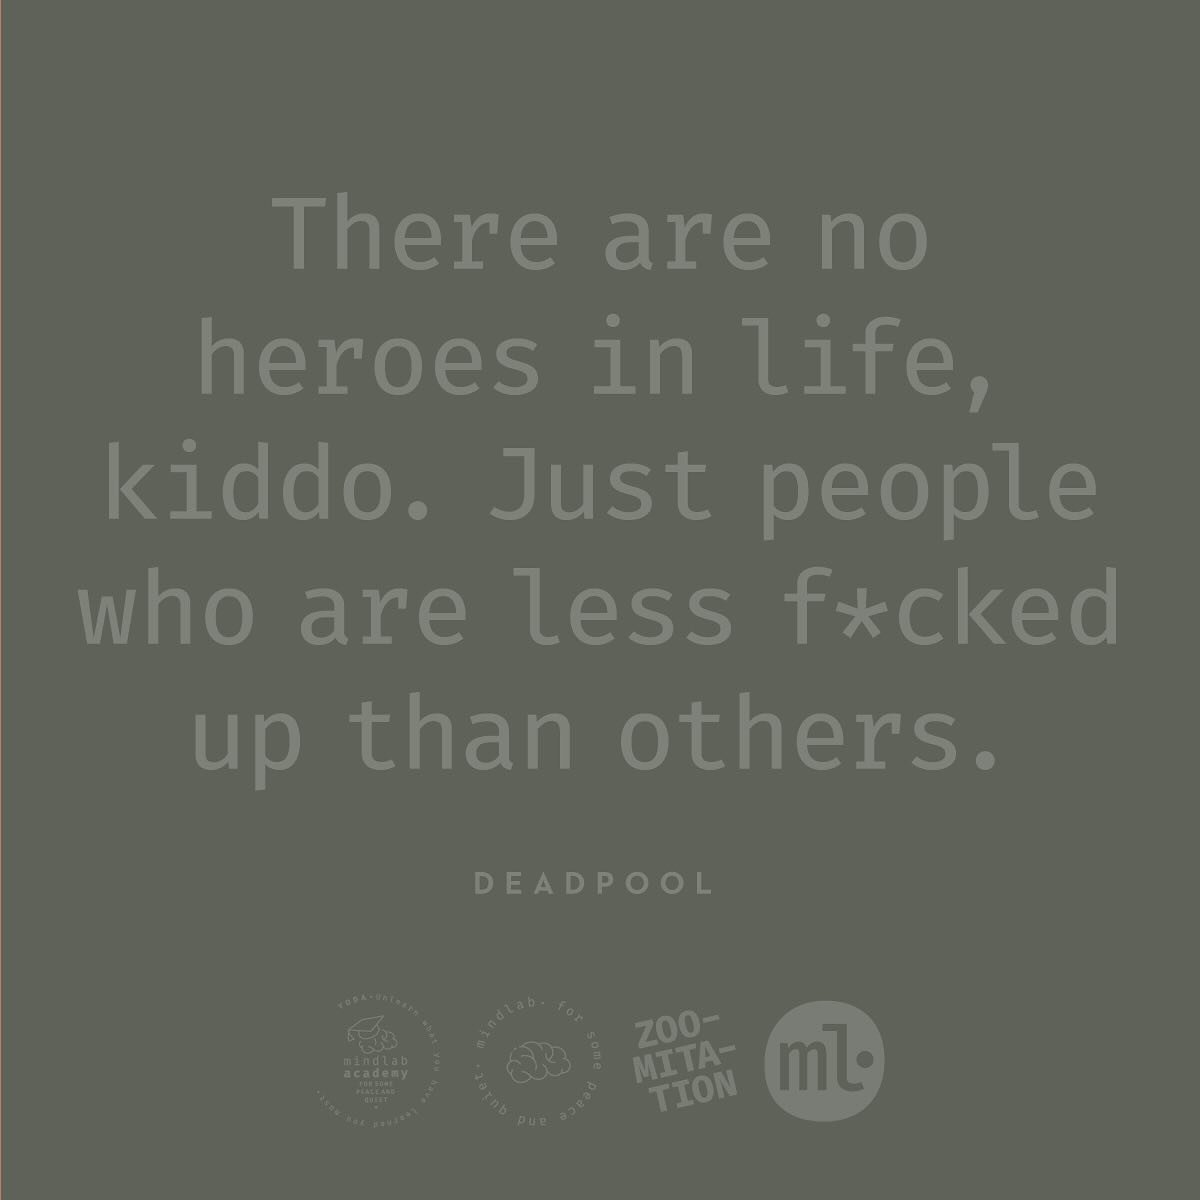 There are no heroes in life, kiddo. Just people who are less f*cked up than others. DEADPOOL

#suffering #leid #dukkha #achtsamkeit #meditation #mindfulness #mentalhealth #thehumancondition #metacognition #awareness #upekkha #metta #karuna #mudita #m